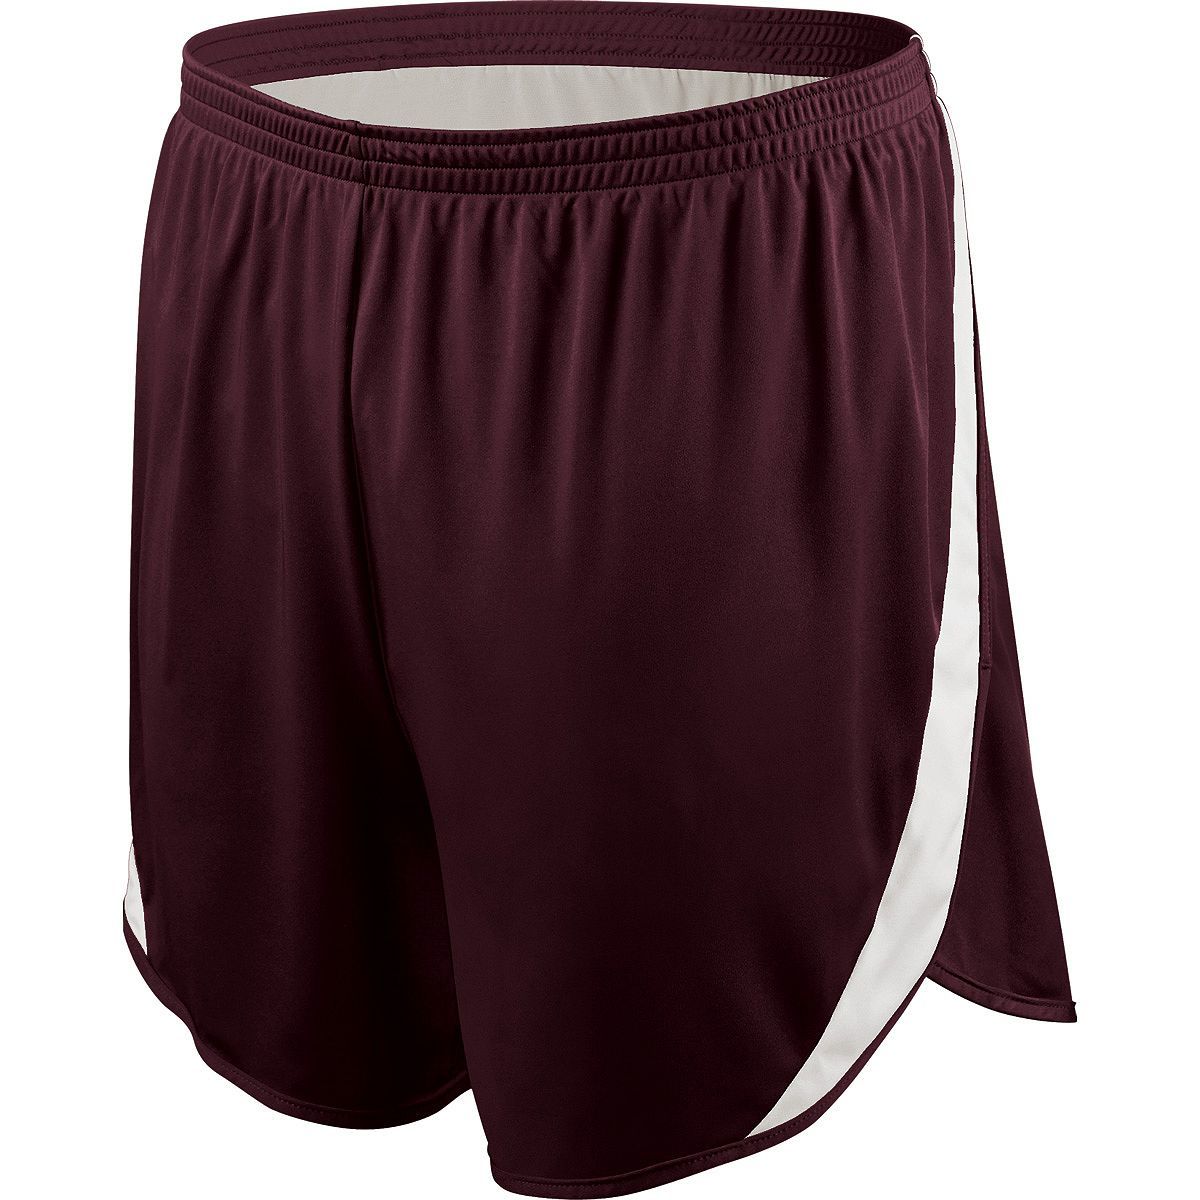 Selected Color is Dark Maroon/White